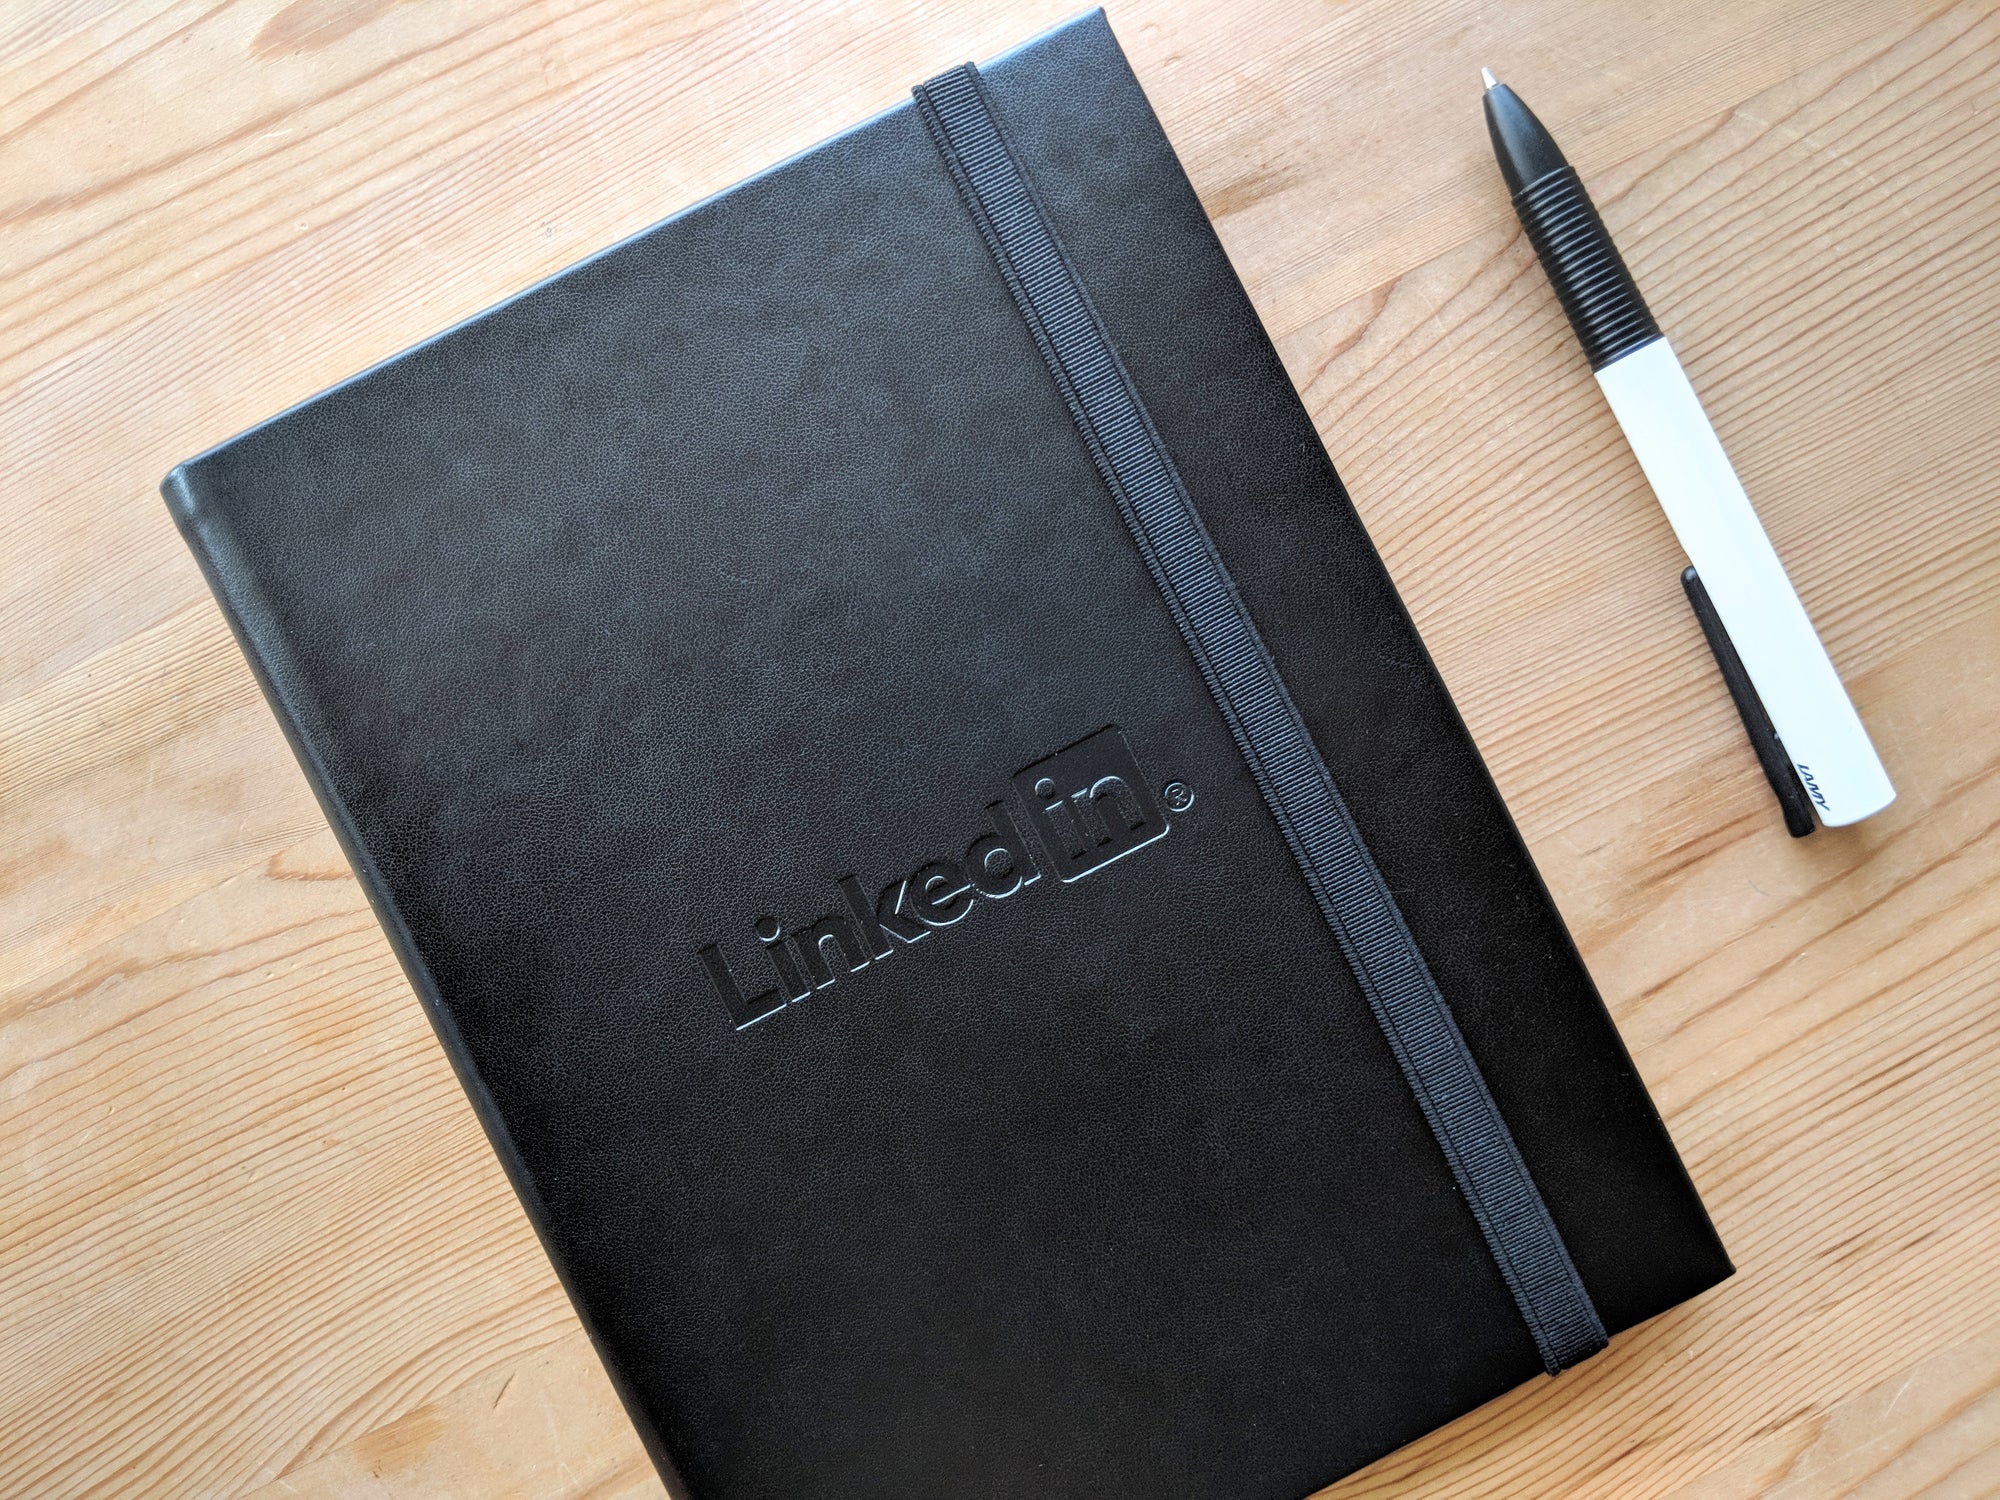 Customised branded eco notebooks with your logo are available for the Paper Saver Reusable Eco Notebook.